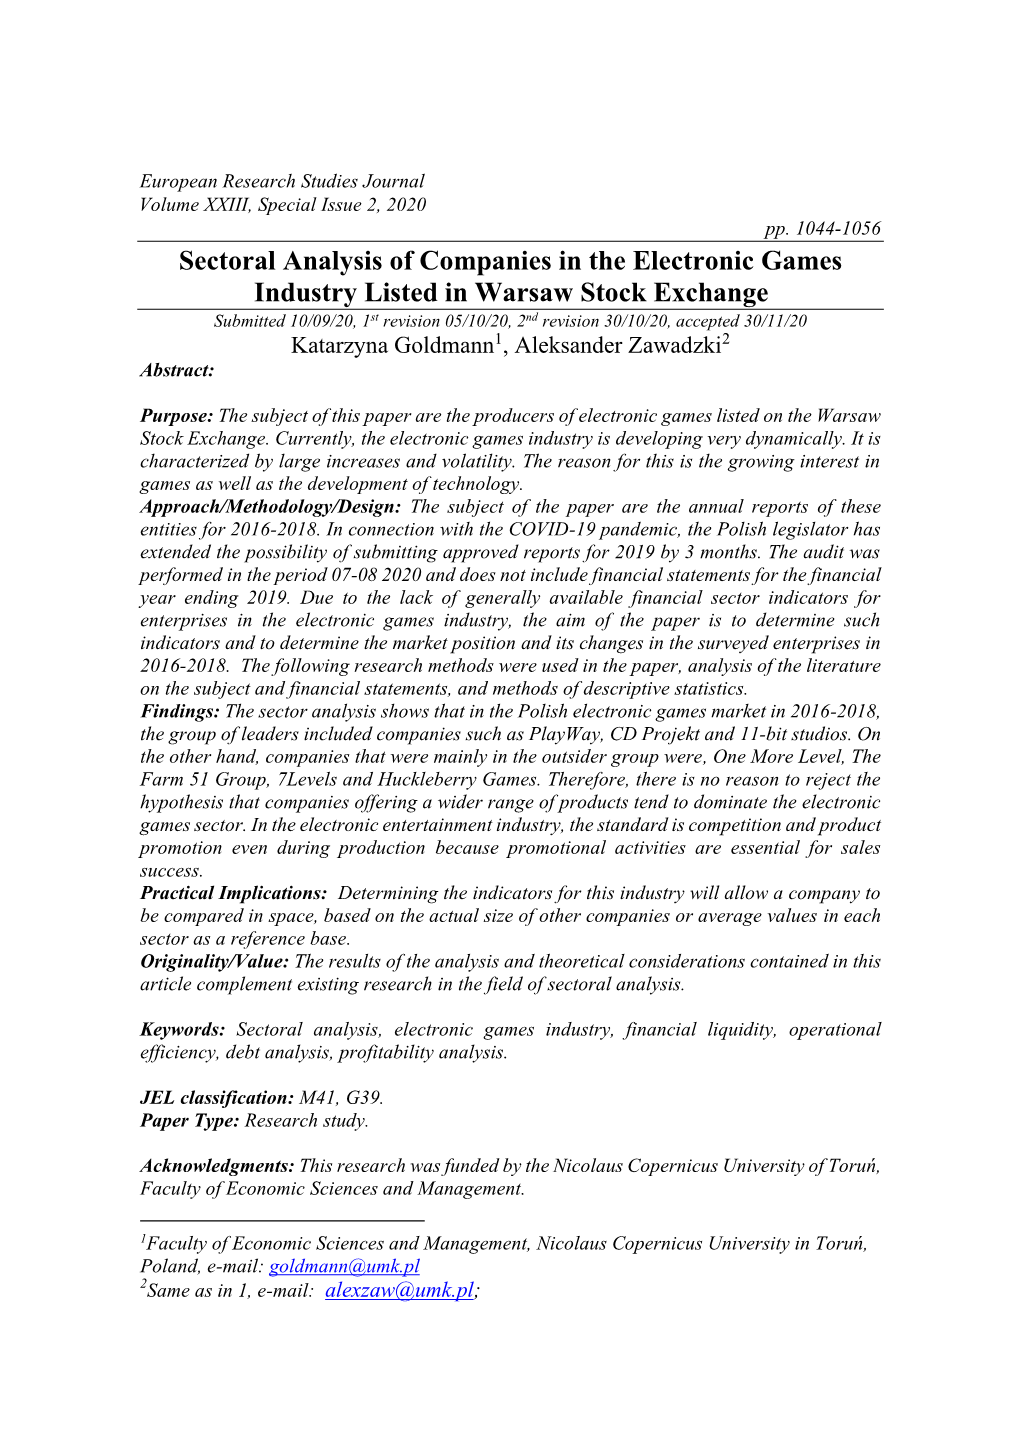 Sectoral Analysis of Companies in the Electronic Games Industry Listed In